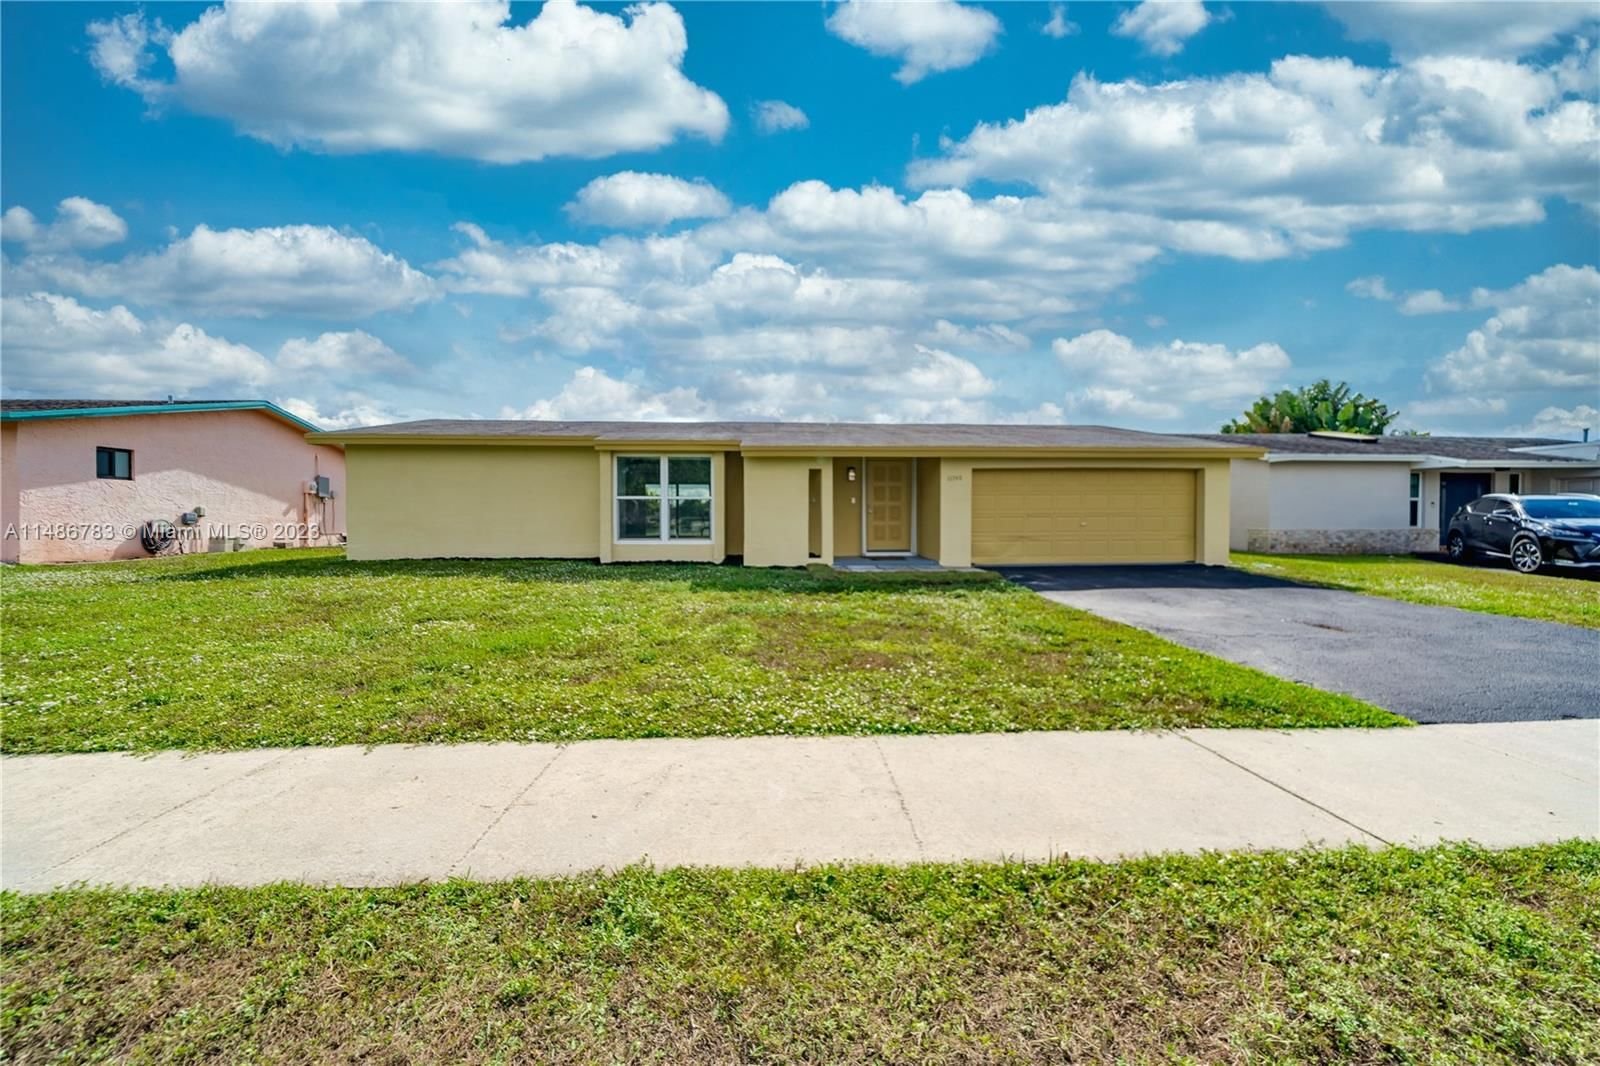 Real estate property located at 11740 30th Pl, Broward County, Sunrise, FL